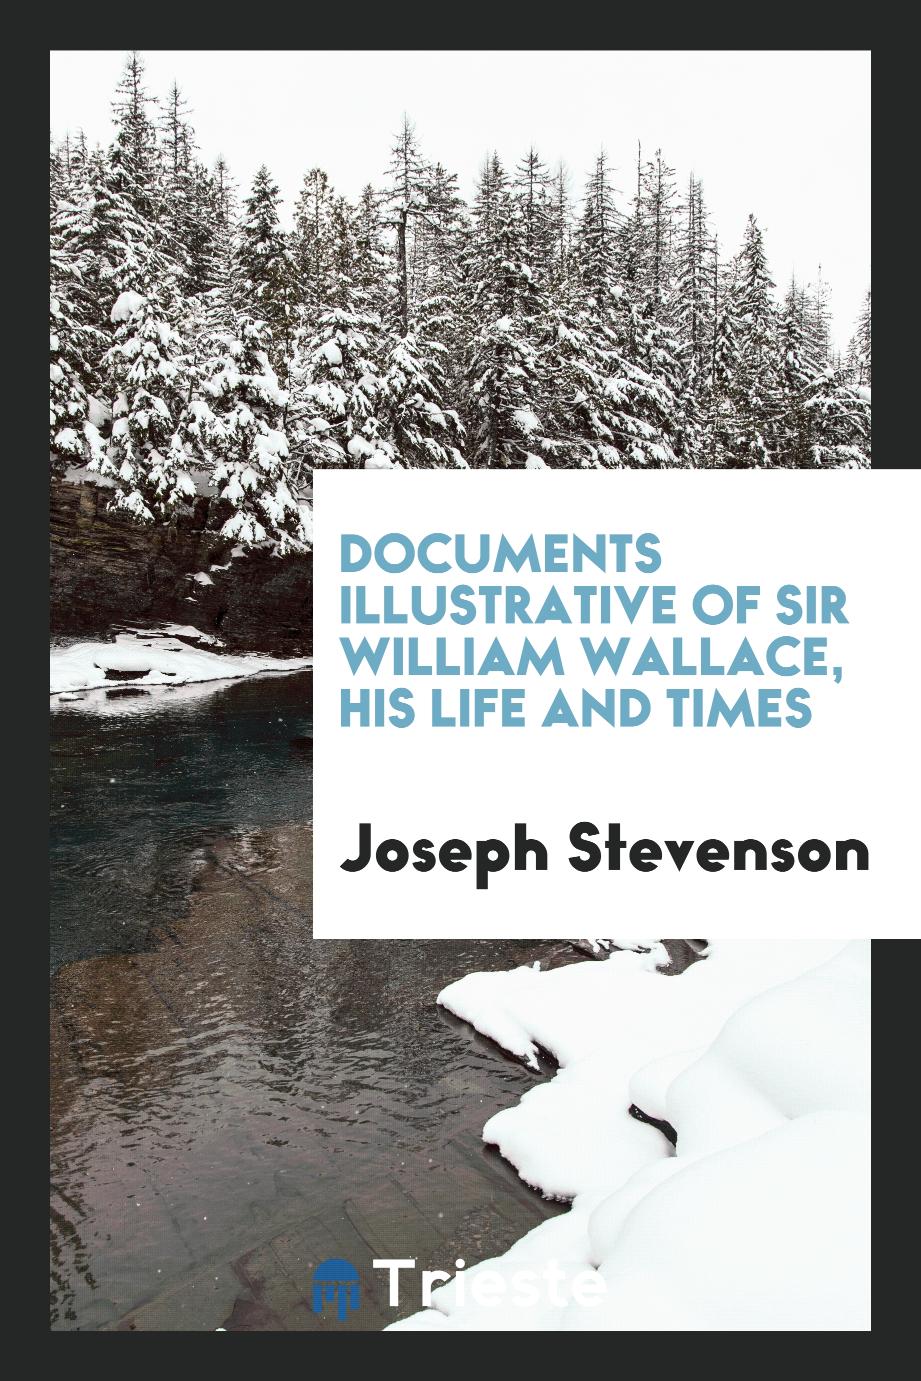 Joseph Stevenson - Documents Illustrative of Sir William Wallace, His Life and Times